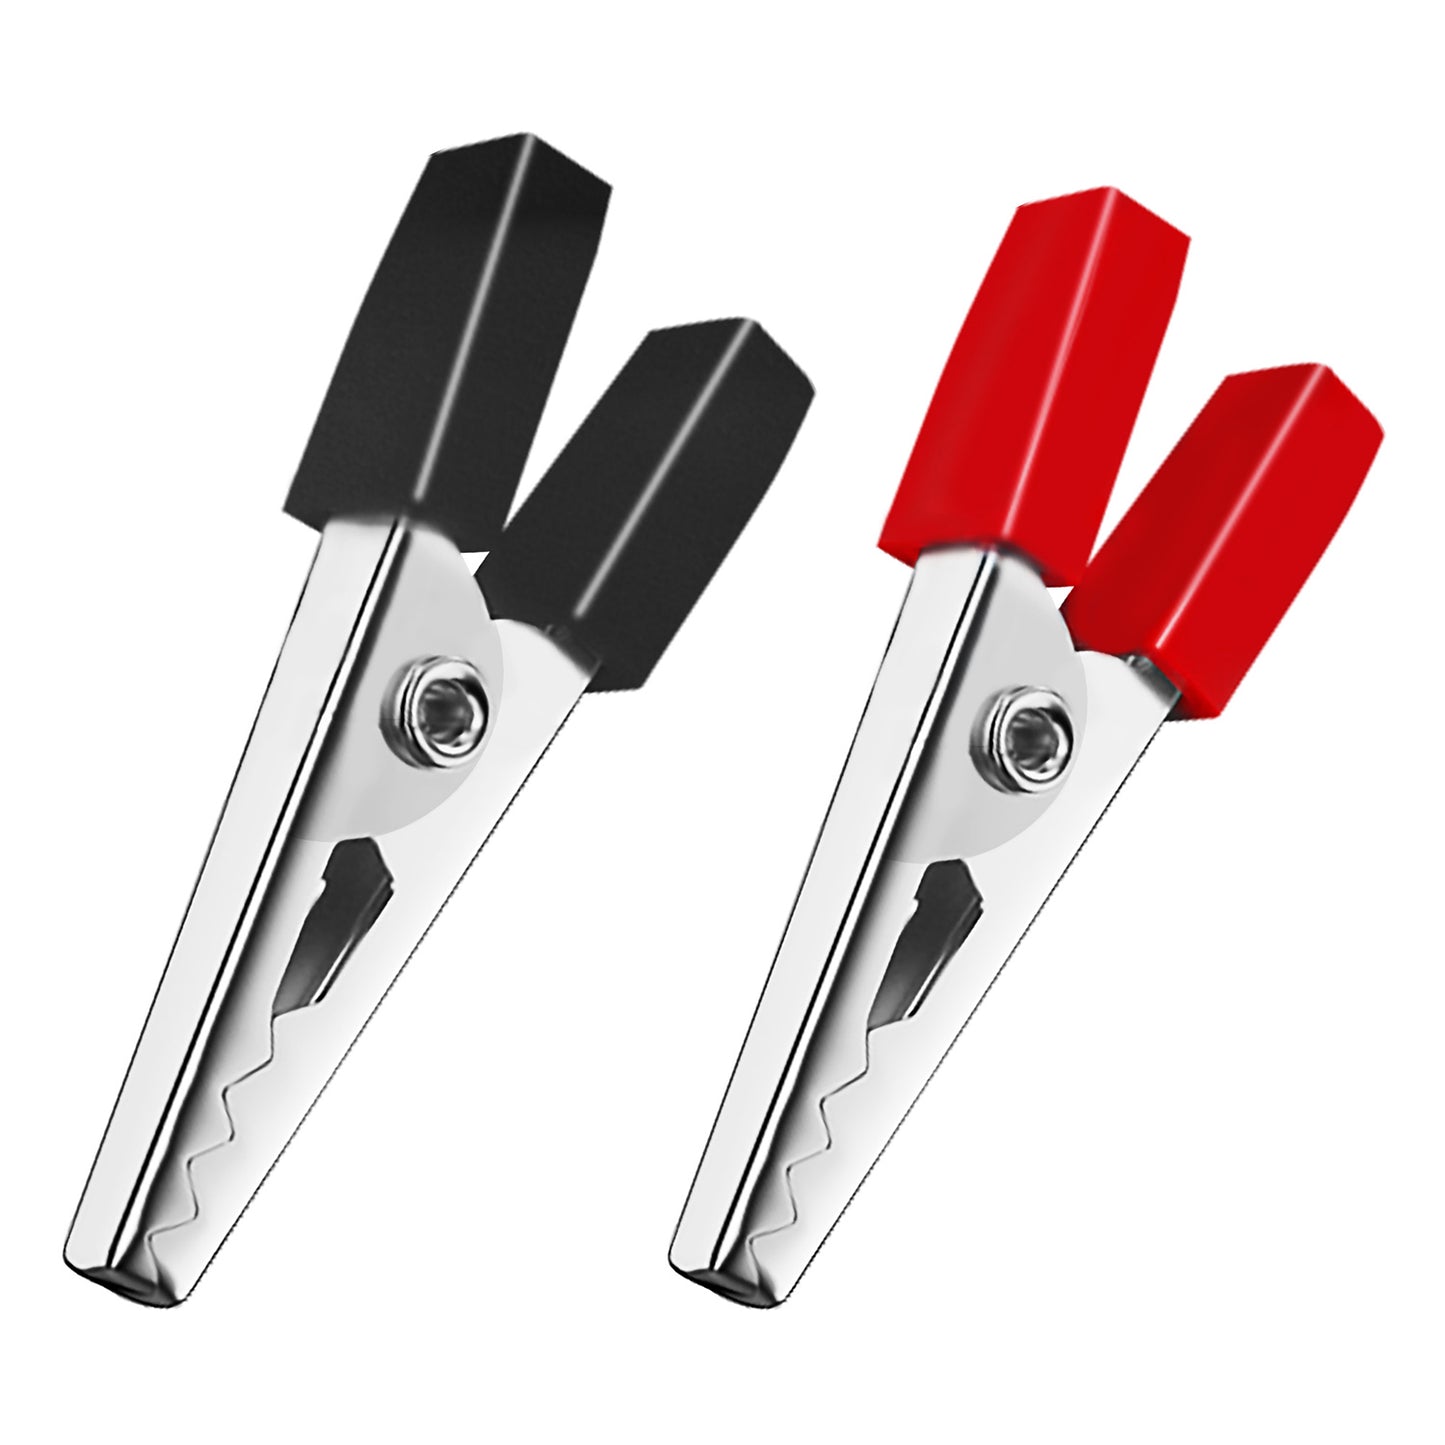 5 Core Premium 72 Pieces Electrical Metal Alligator Clip| Crocodile Clips Spring Clamps with Plastic Hands Red & Black |Used in Laboratory Electric Testing Work and Cable Lead Clip- alligator 72 pcs